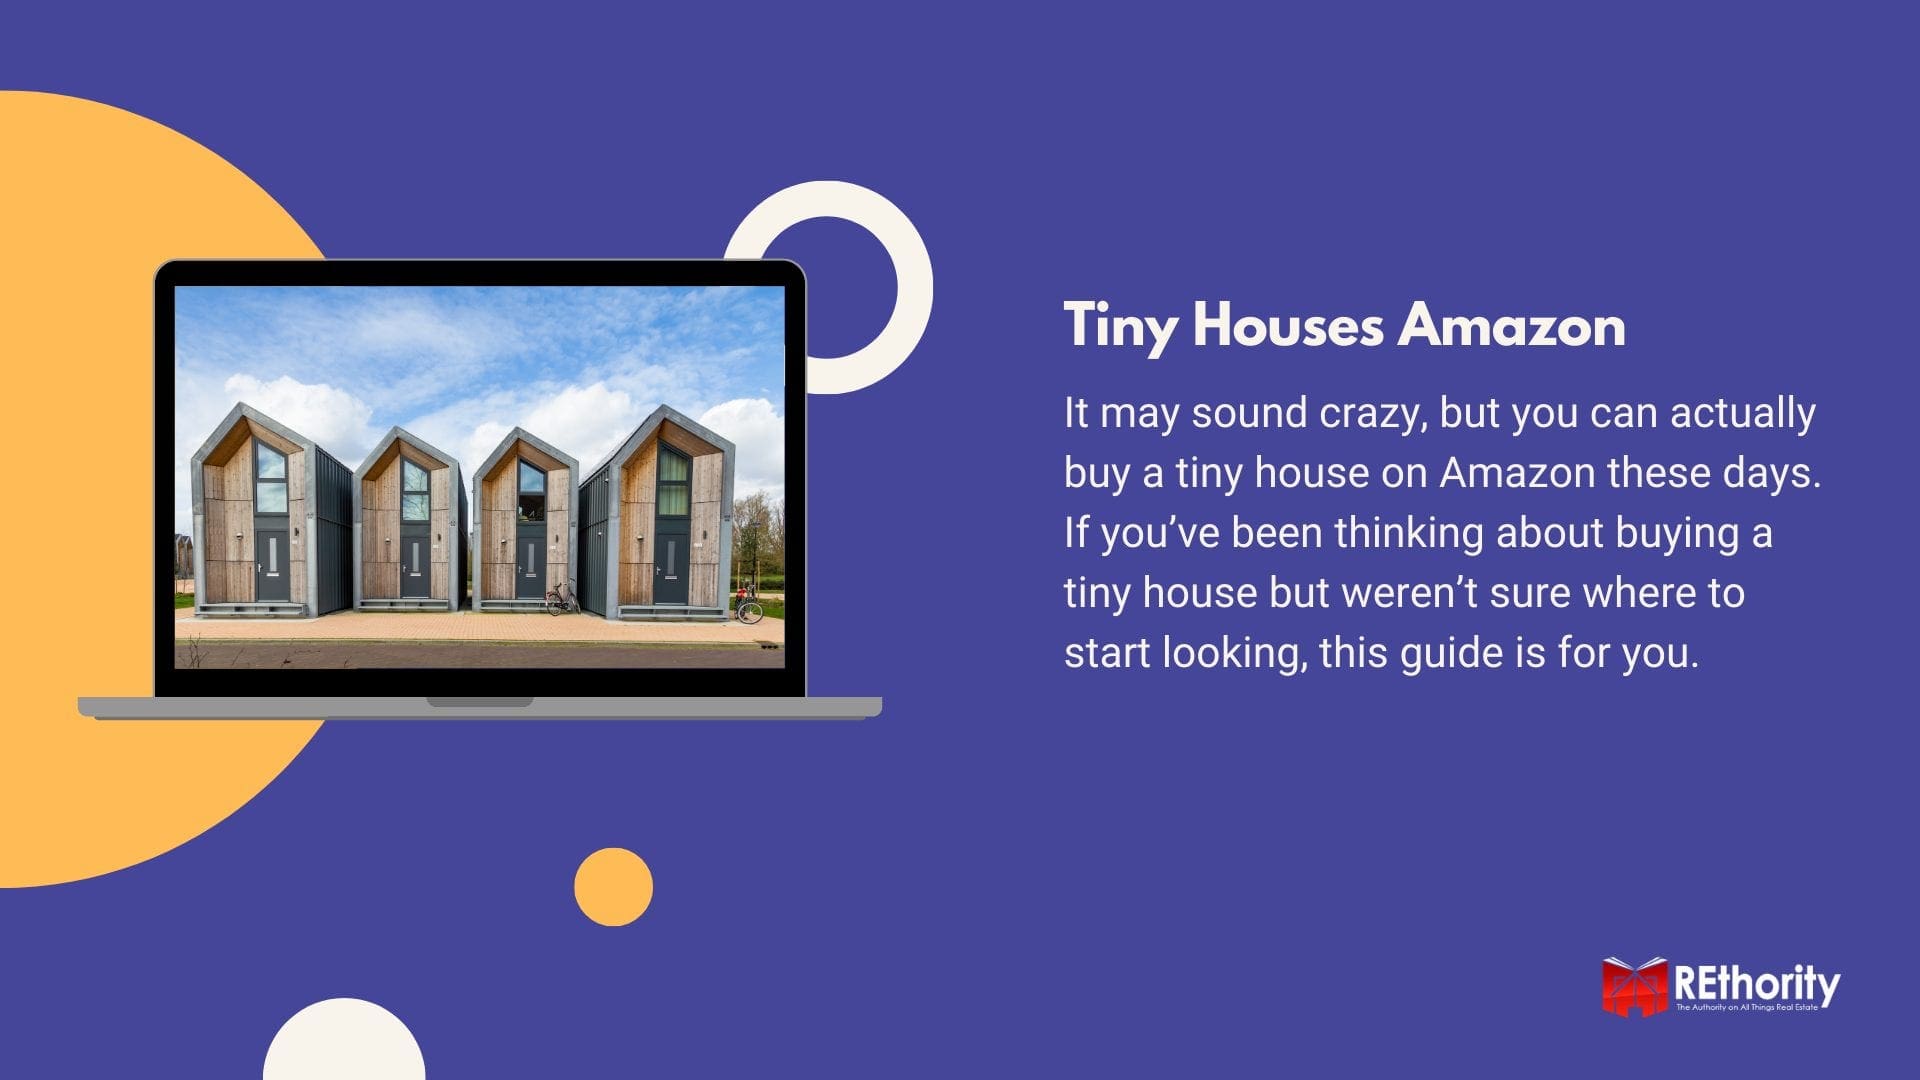 Tiny houses available on Amazon featuring a bunch of modular homes displayed on a laptop